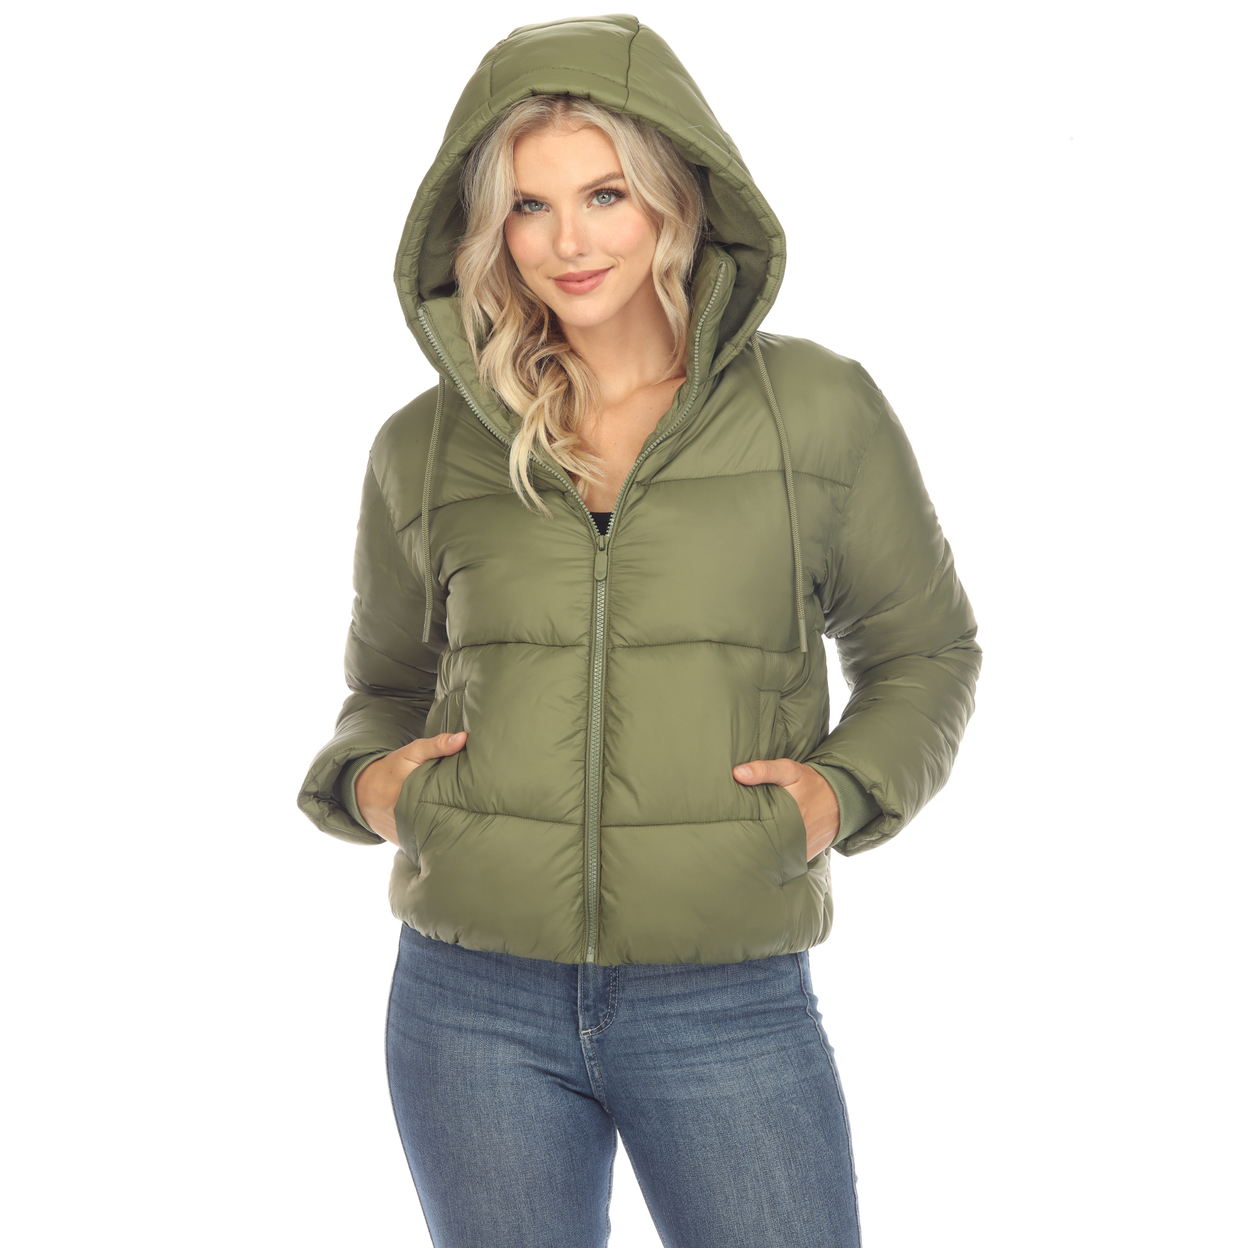 White Mark Women's Zip Hooded Puffer Jacket With Pockets - Blue, Small